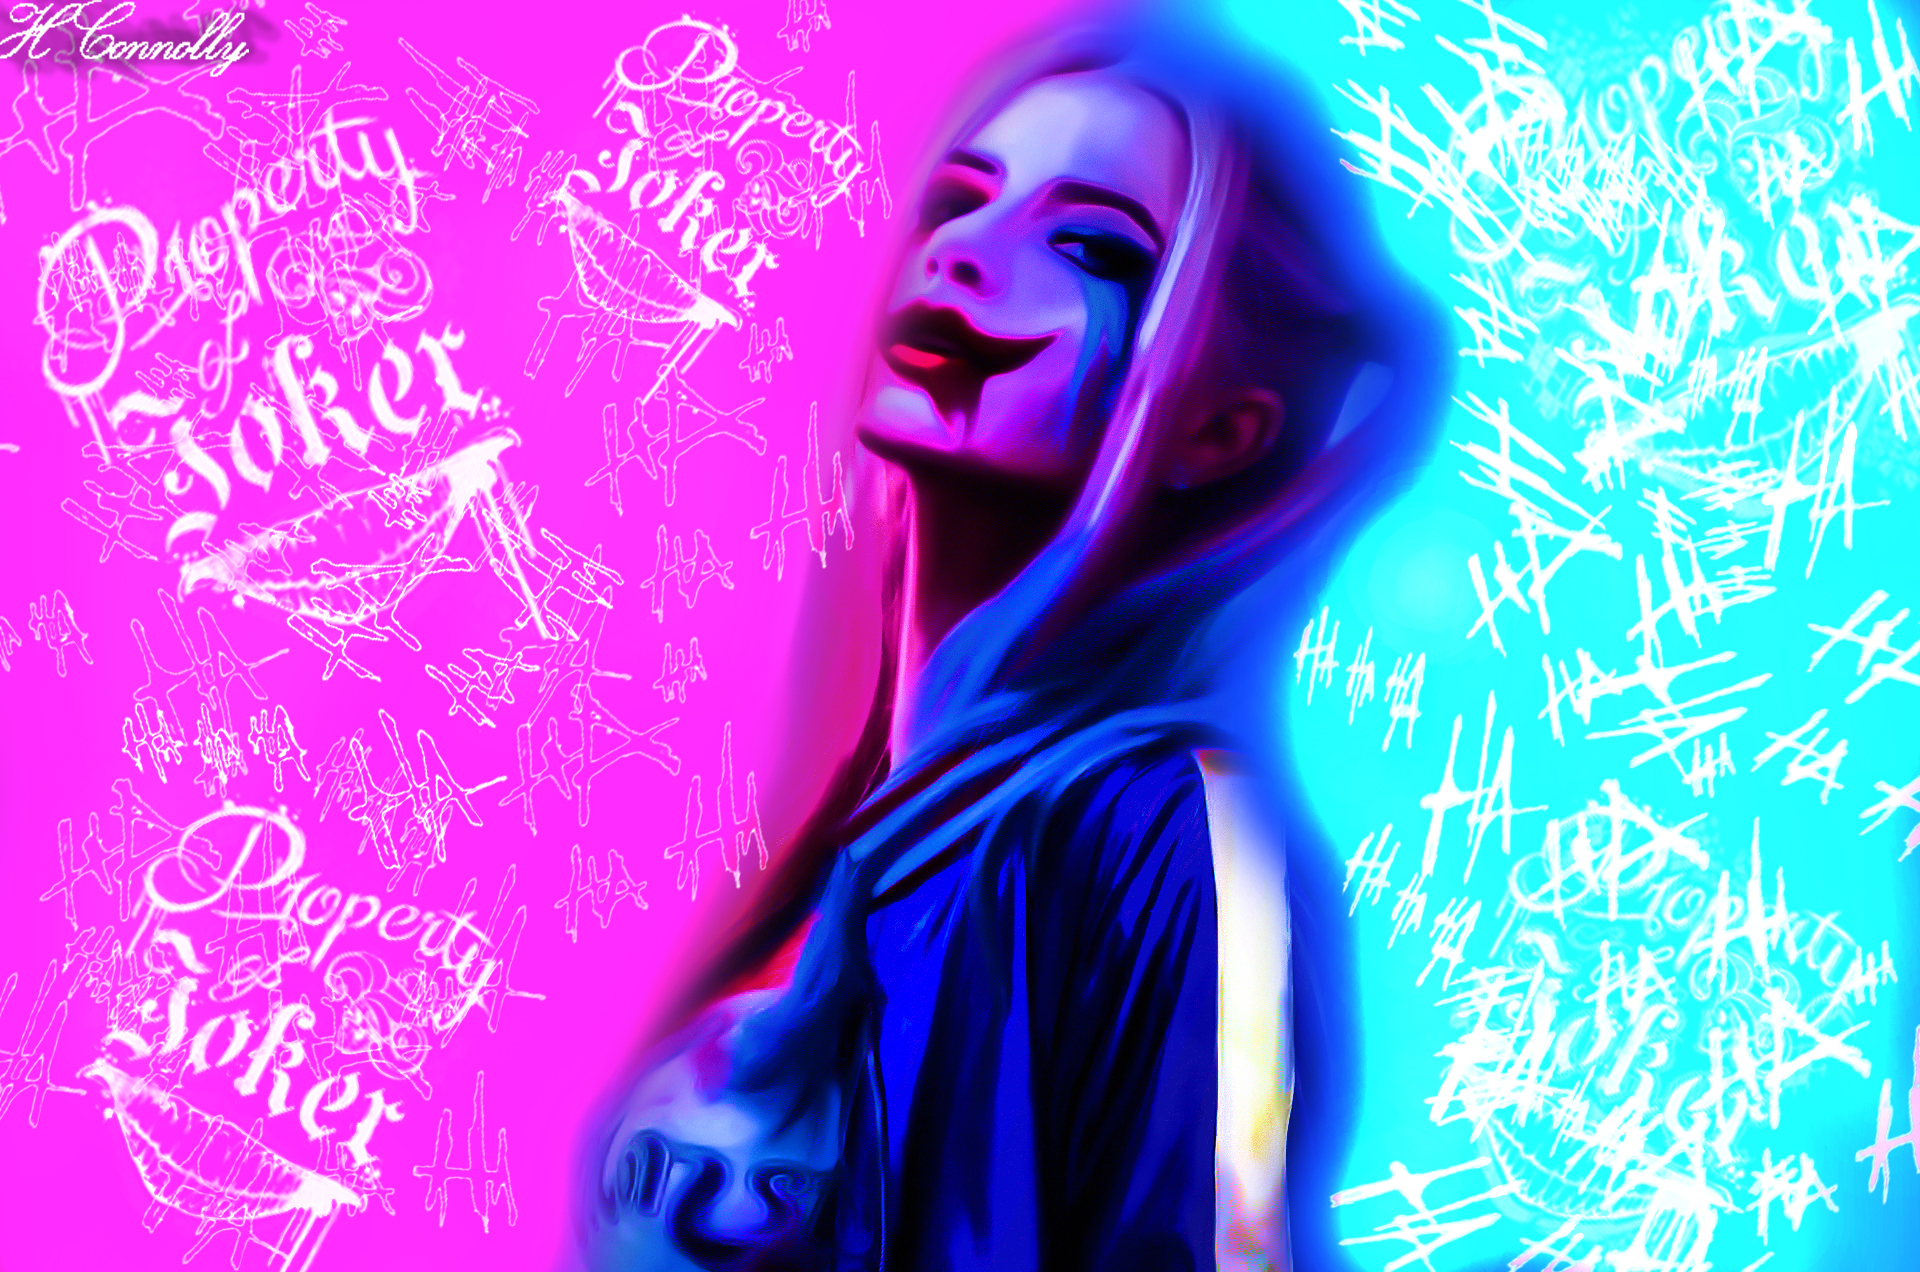 Harley Quinn Digital Painting With Background By Hxmxconnolly On